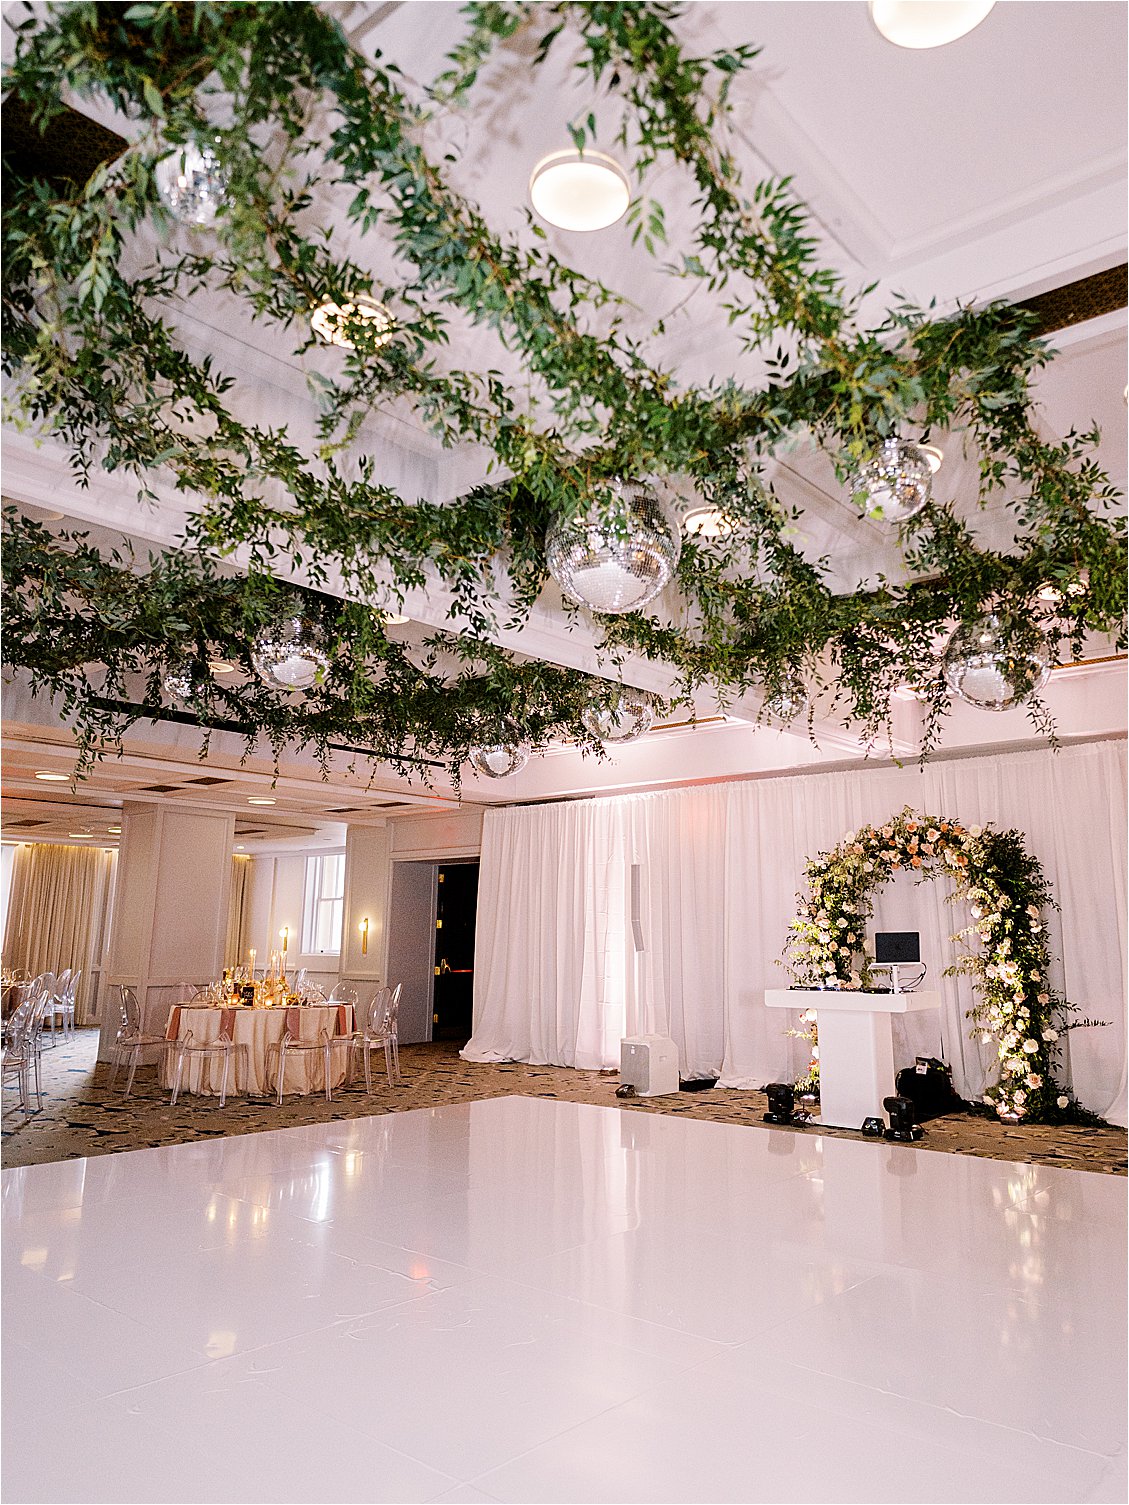 Garden Disco wedding reception with greenery installation filled with disco balls, white wrapped dance floor and repurposed ceremony arch